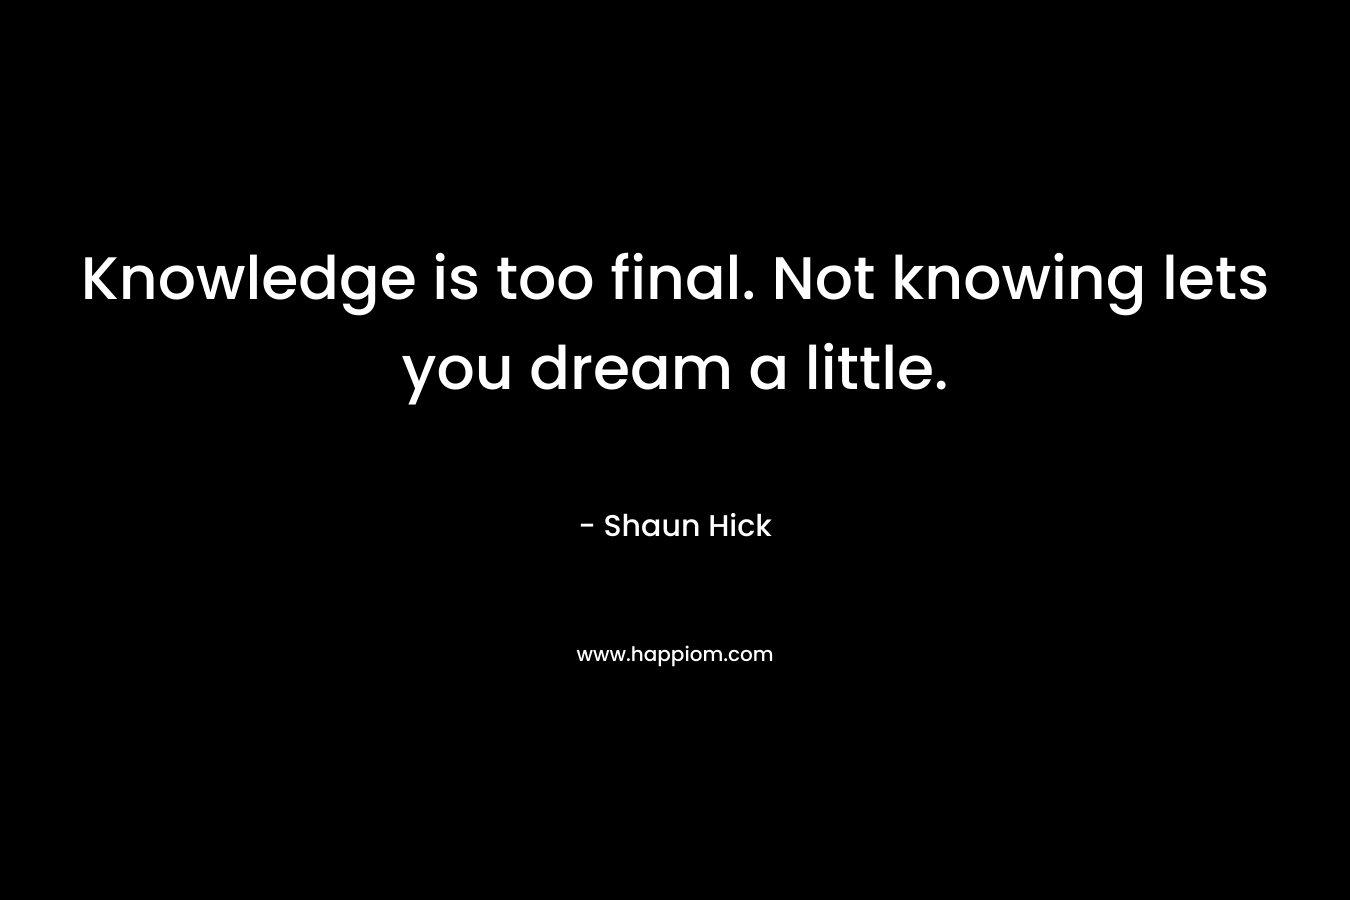 Knowledge is too final. Not knowing lets you dream a little. – Shaun Hick